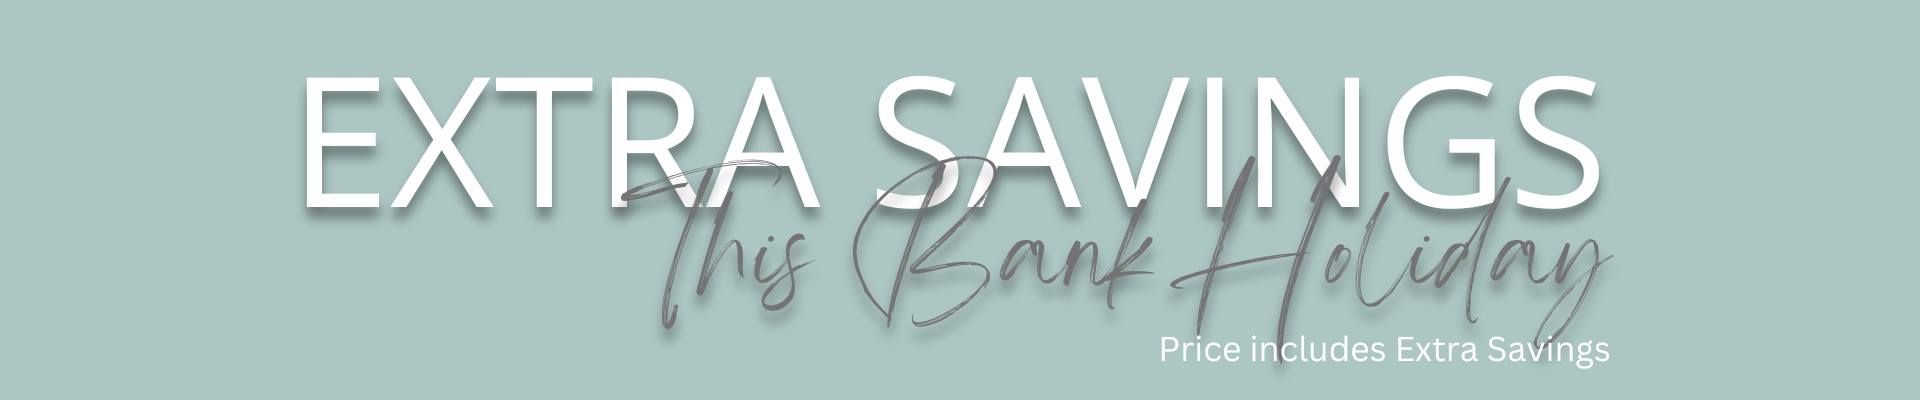 Spring Extra Savings Collections Banner